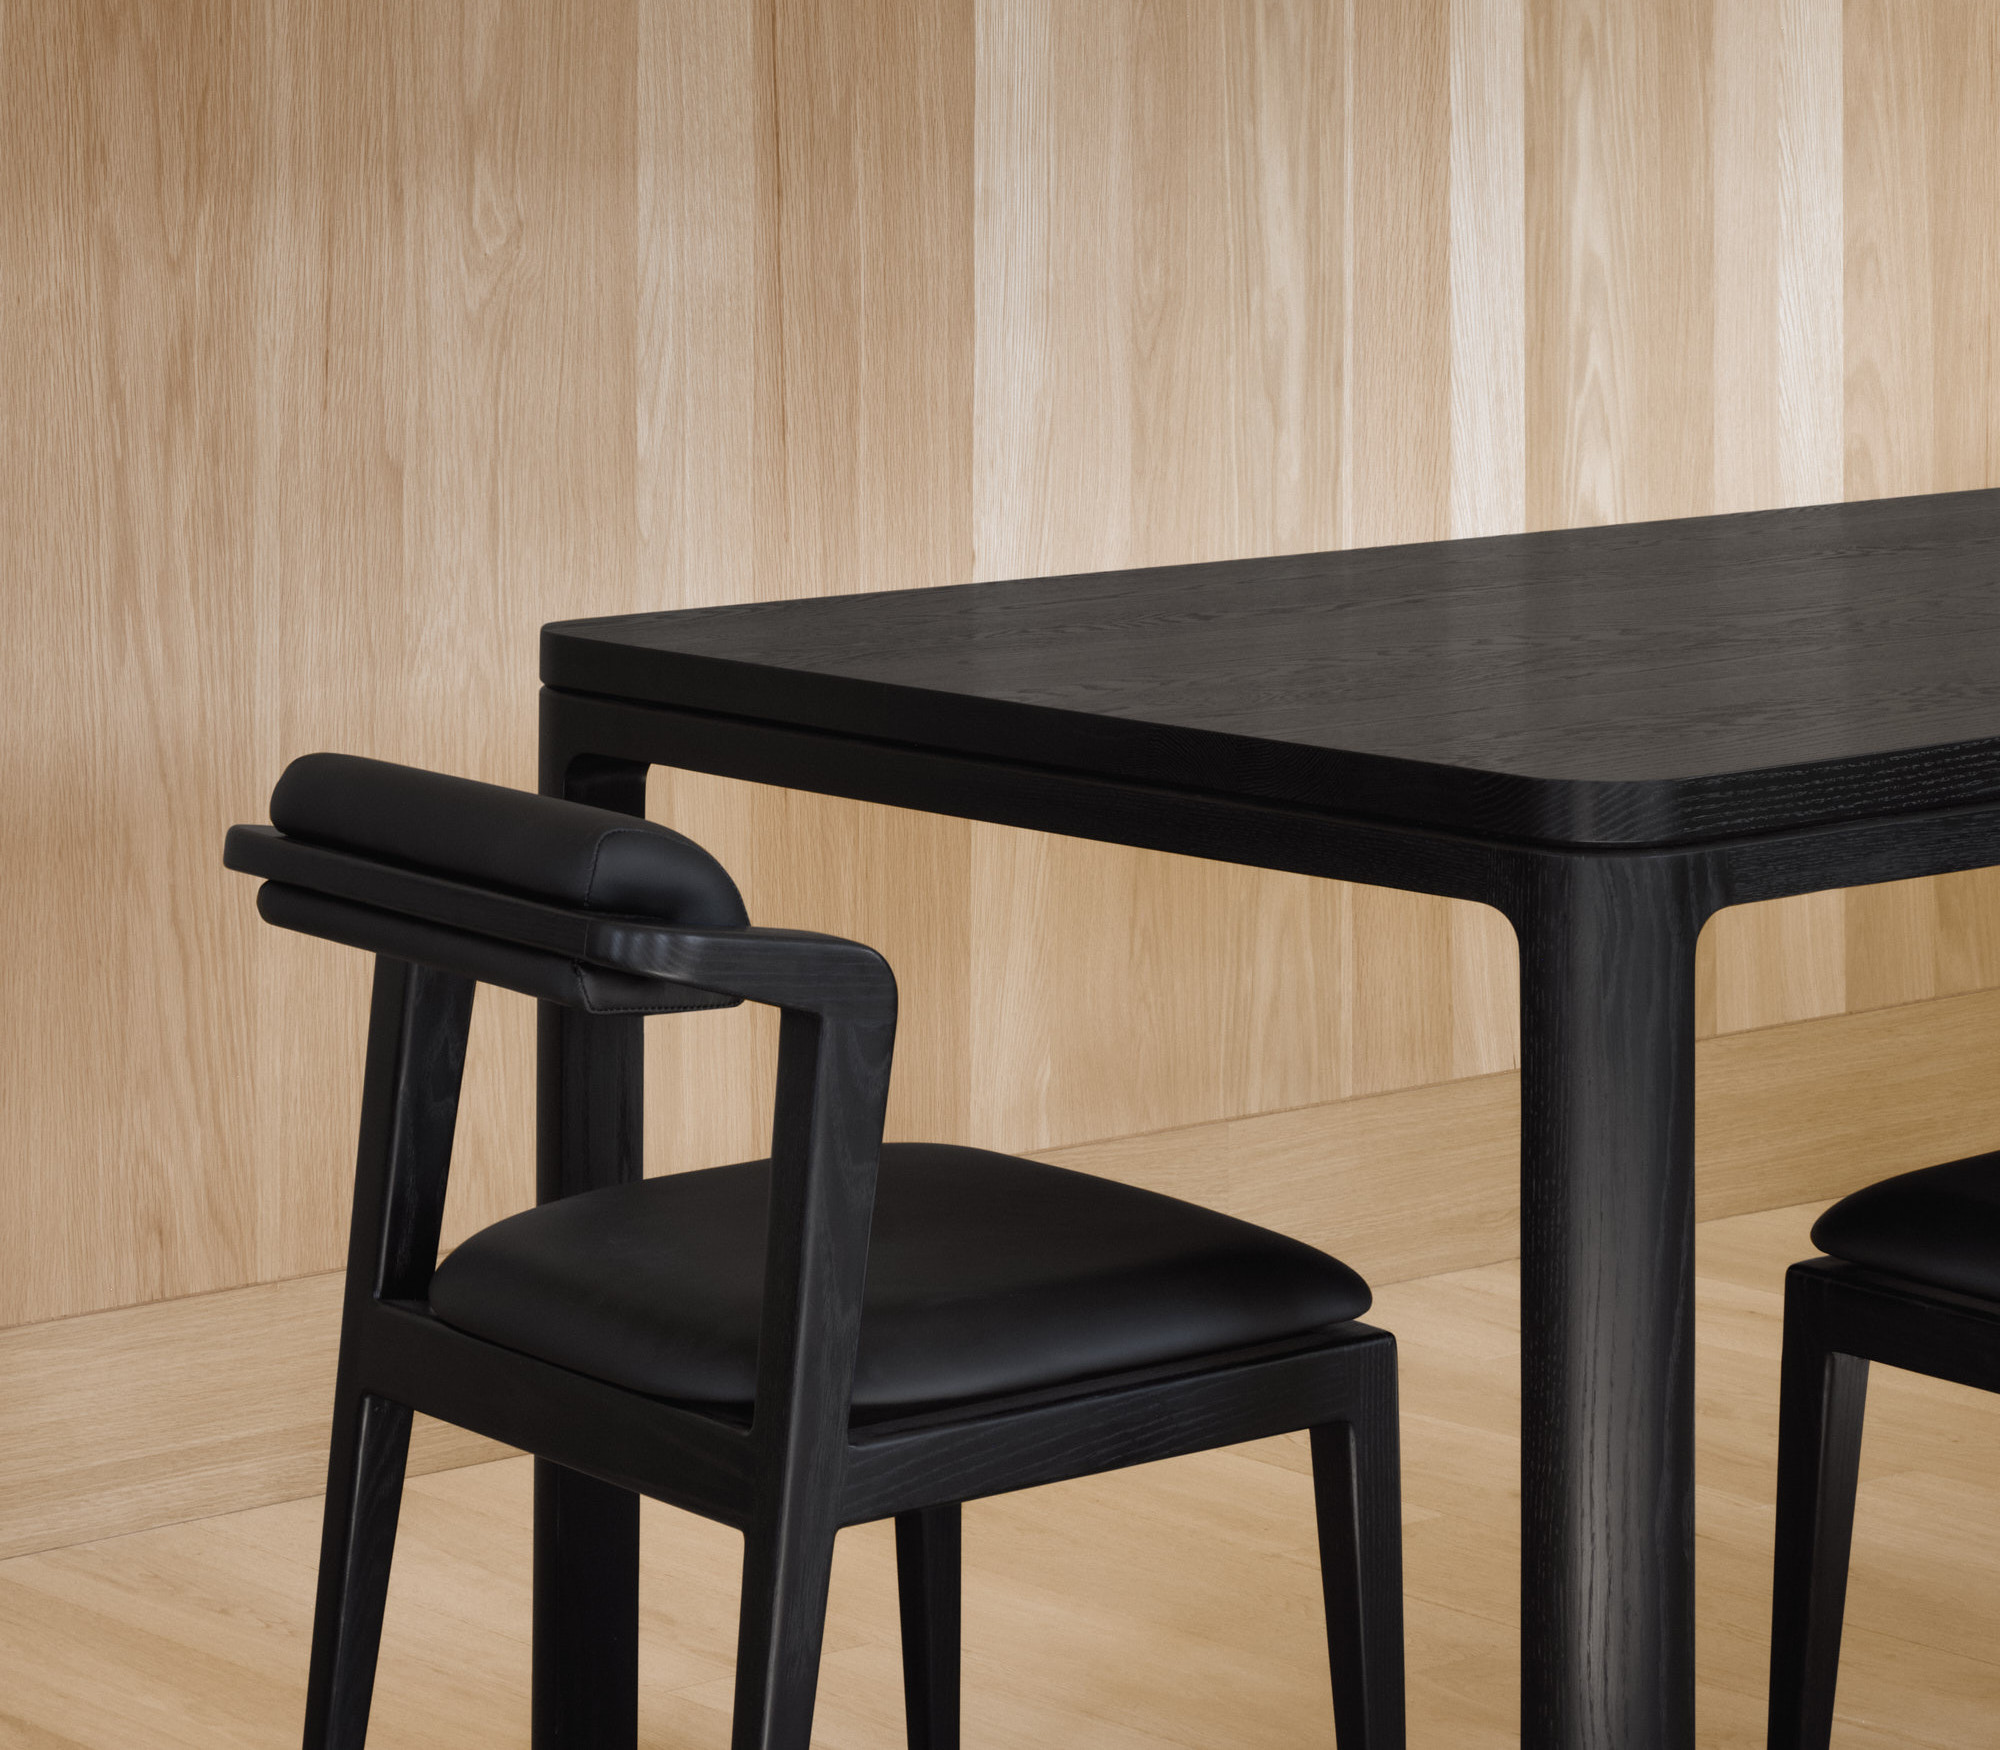 Nord chair without armrests in all black next to black Nord table